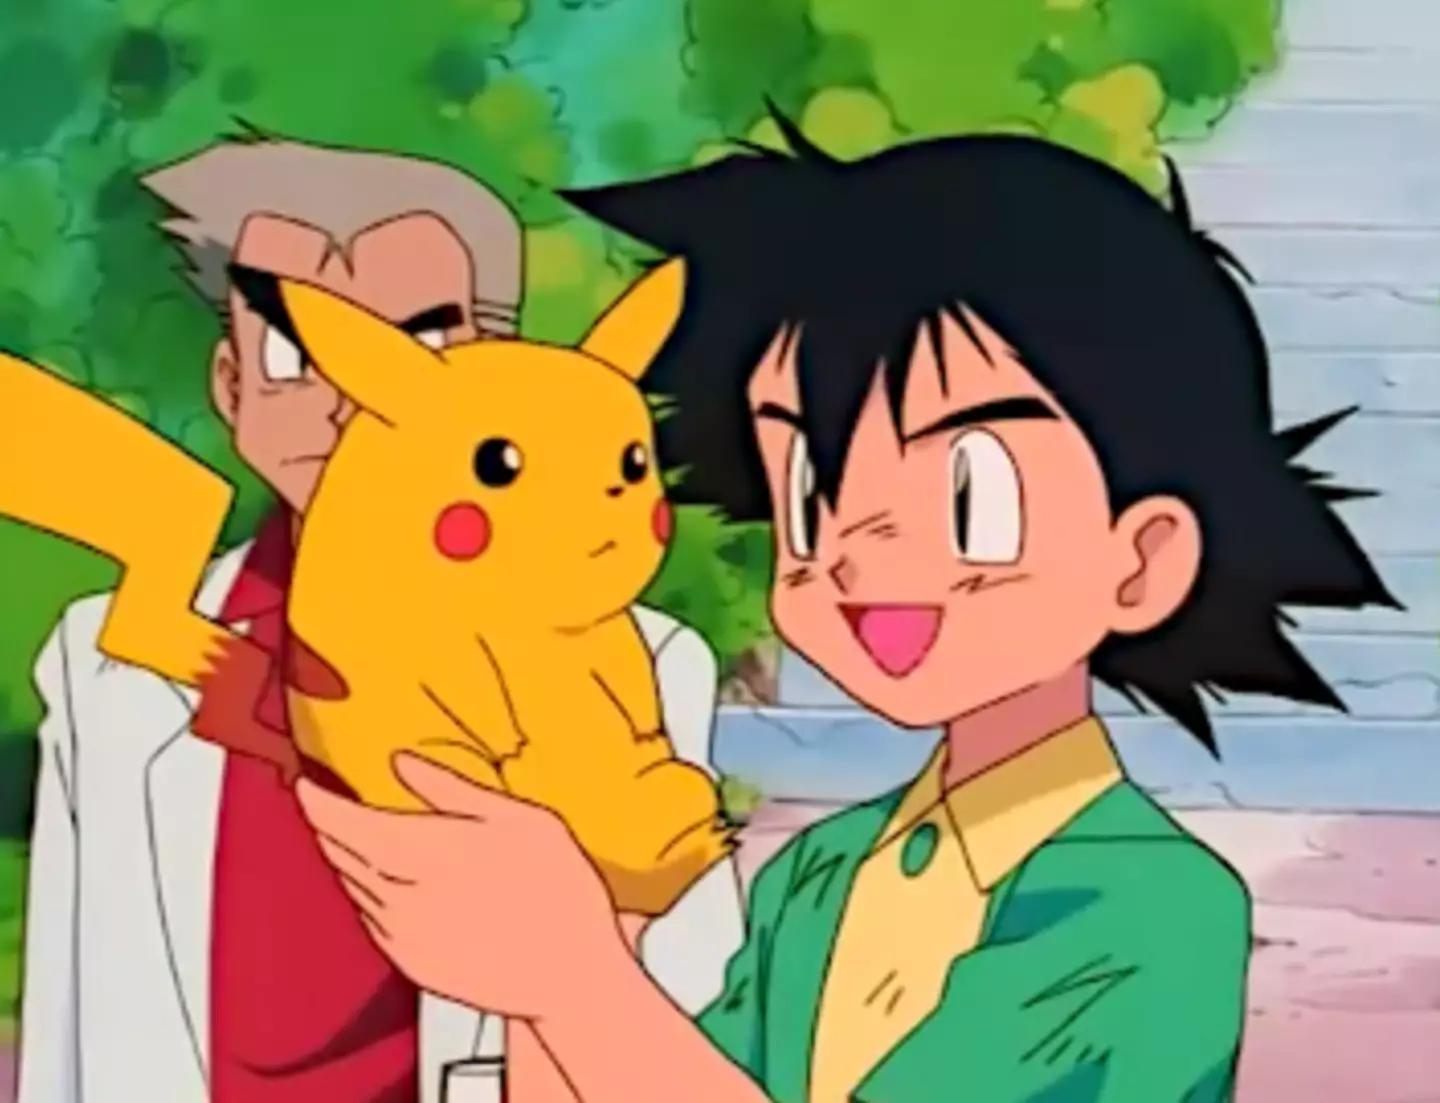 Pokémon was briefly suspended after the ordeal.